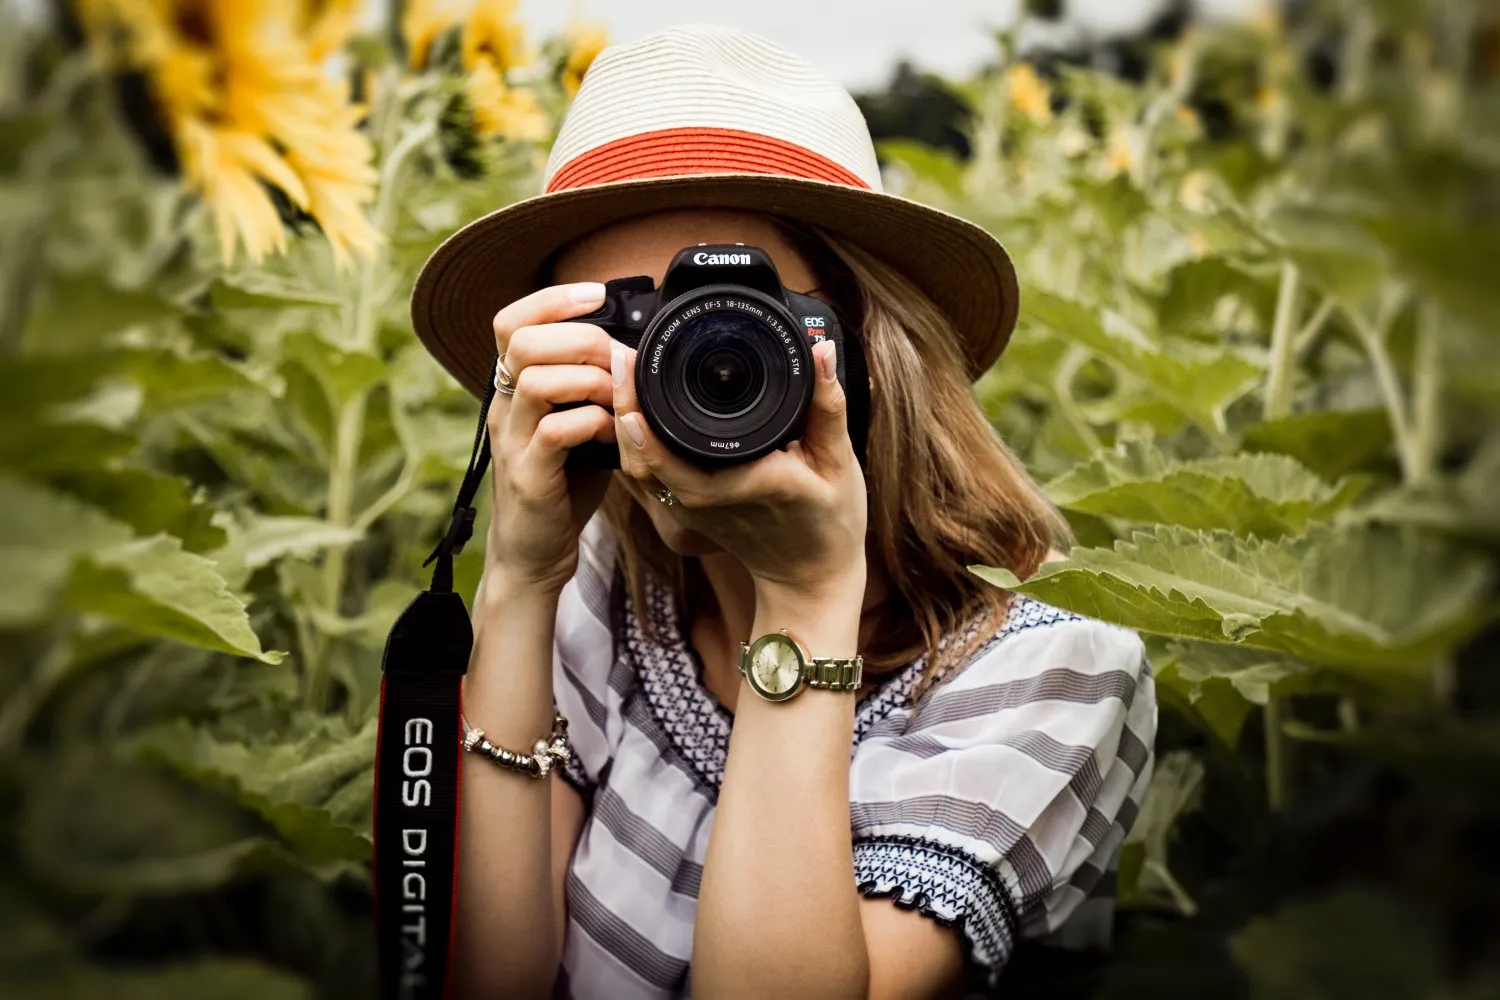 photography tips beginners 10011 2